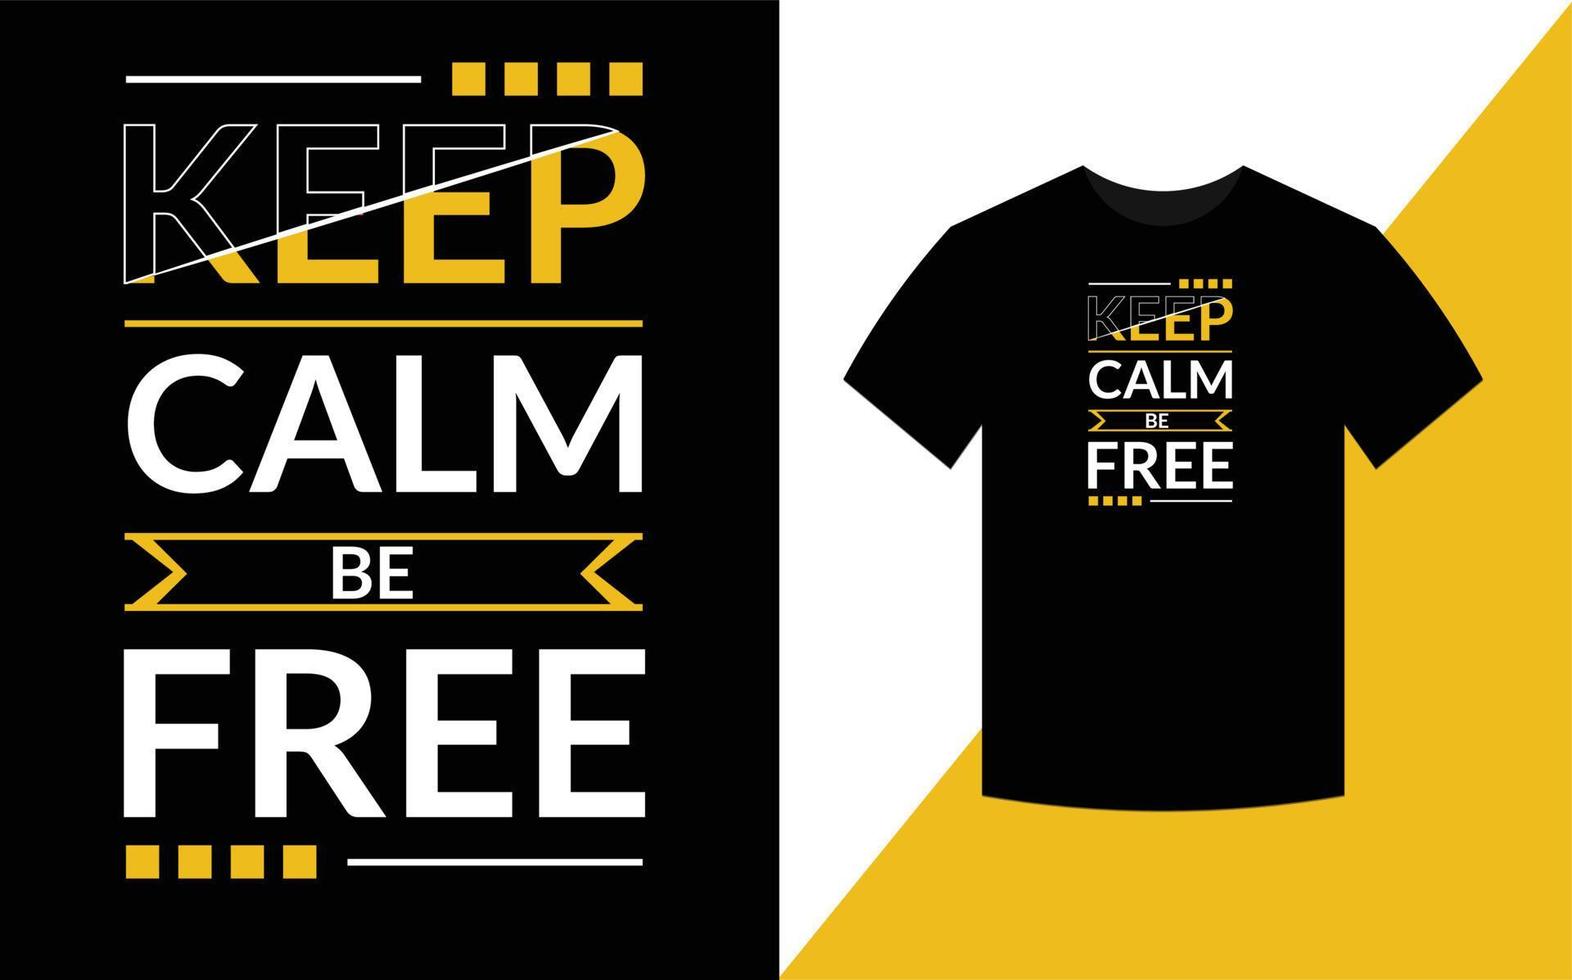 Keep calm be free Typography Inspirational Quotes t shirt design for fashion apparel printing. vector